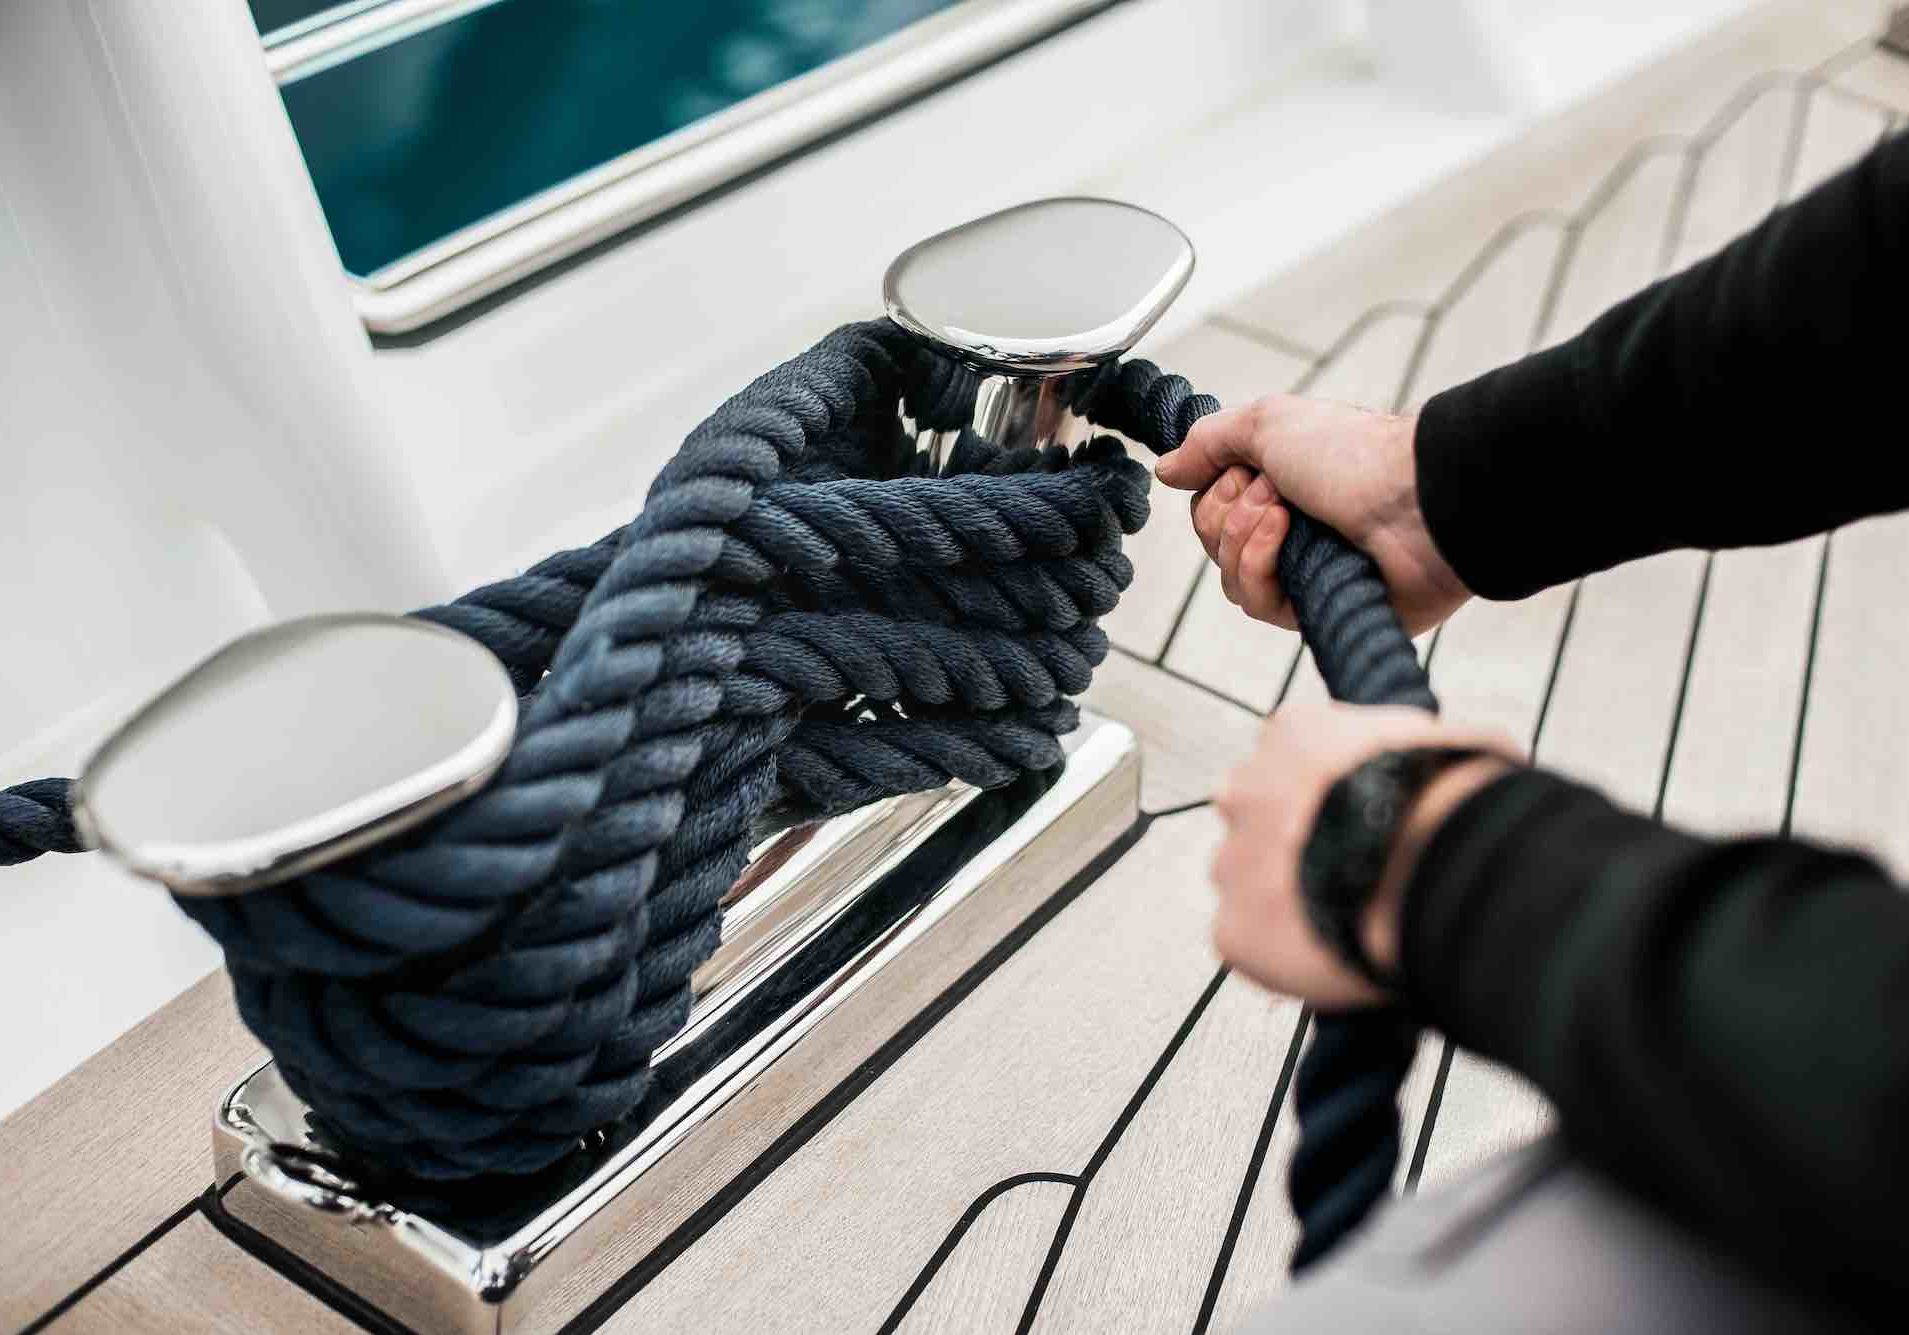 Detail of hands cleating off superyacht mooring lines on the foredeck with teak deck and stainless steel fittings